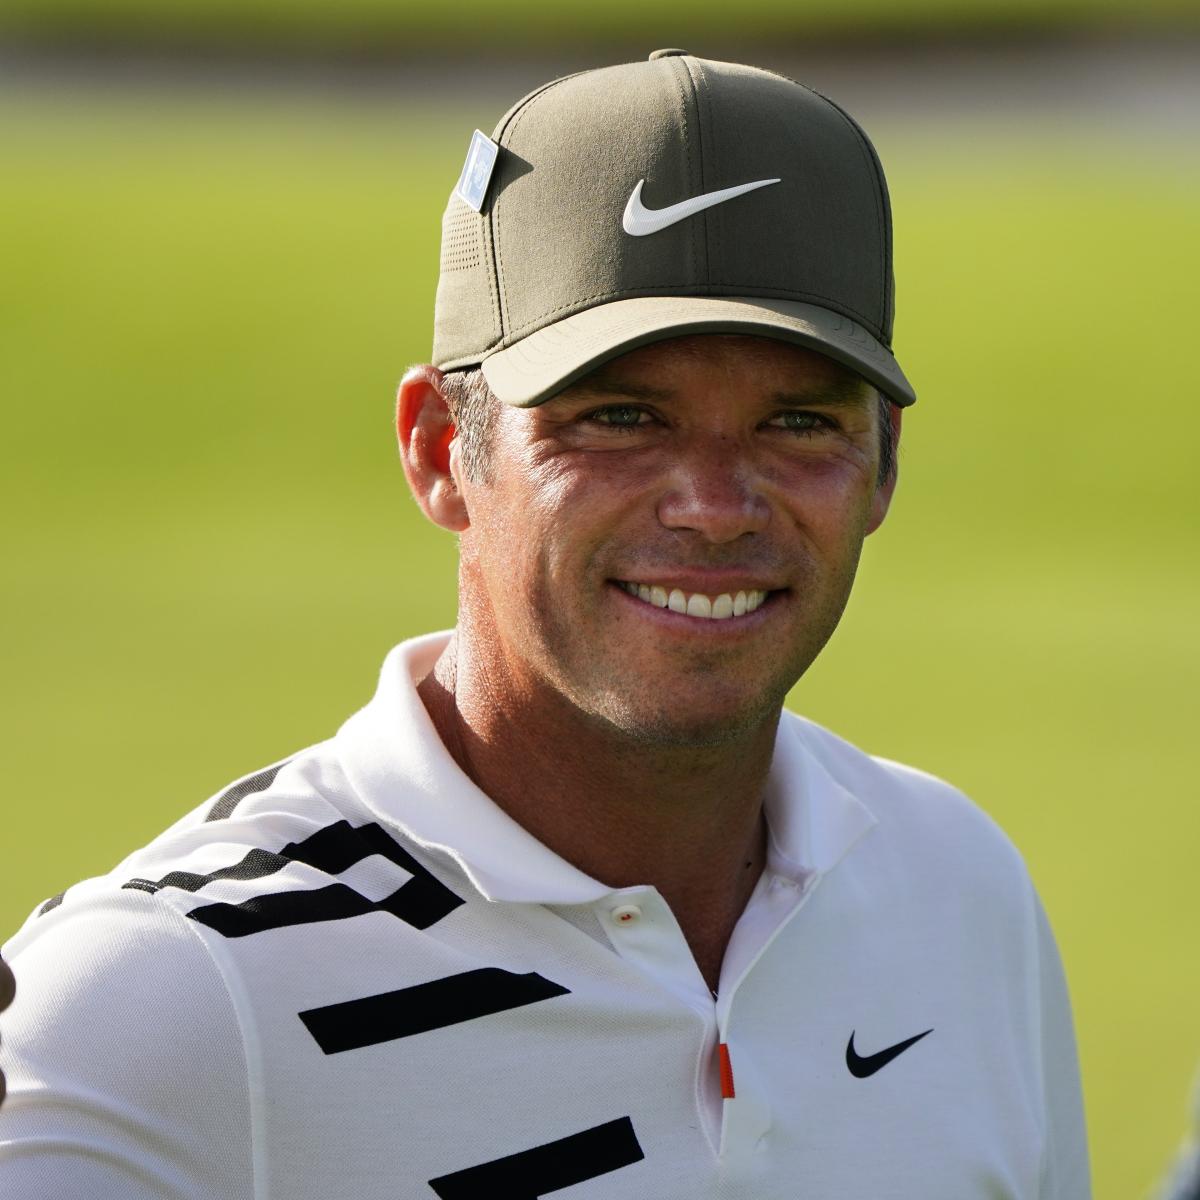 Masters Leaderboard 2020 Updates on Golf's Top Scorers on Friday